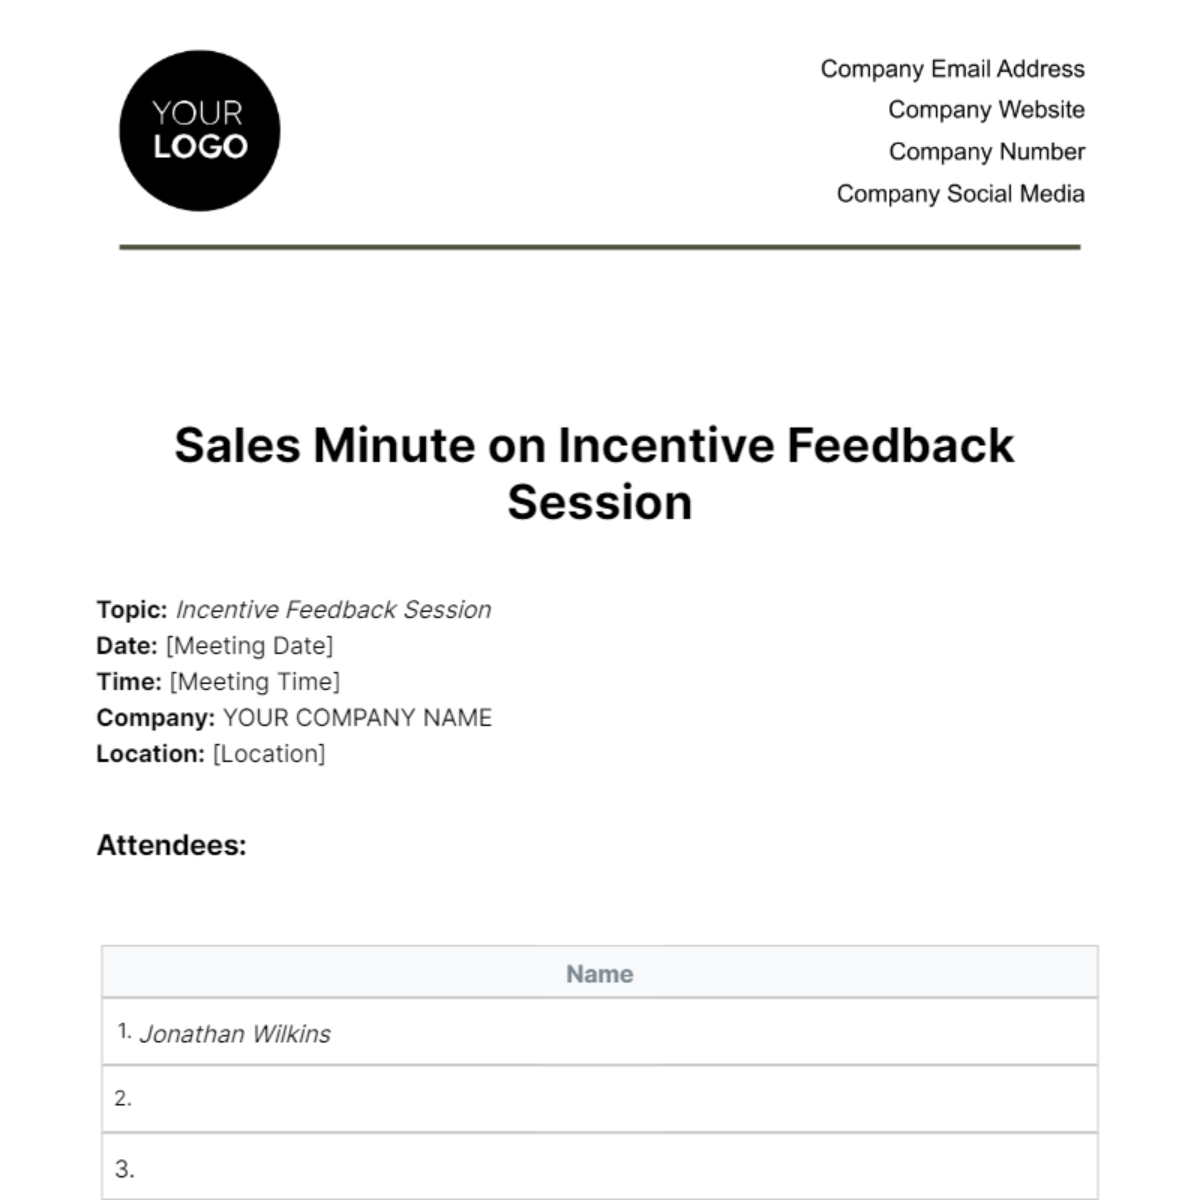 Free Sales Minute on Incentive Feedback Session Template